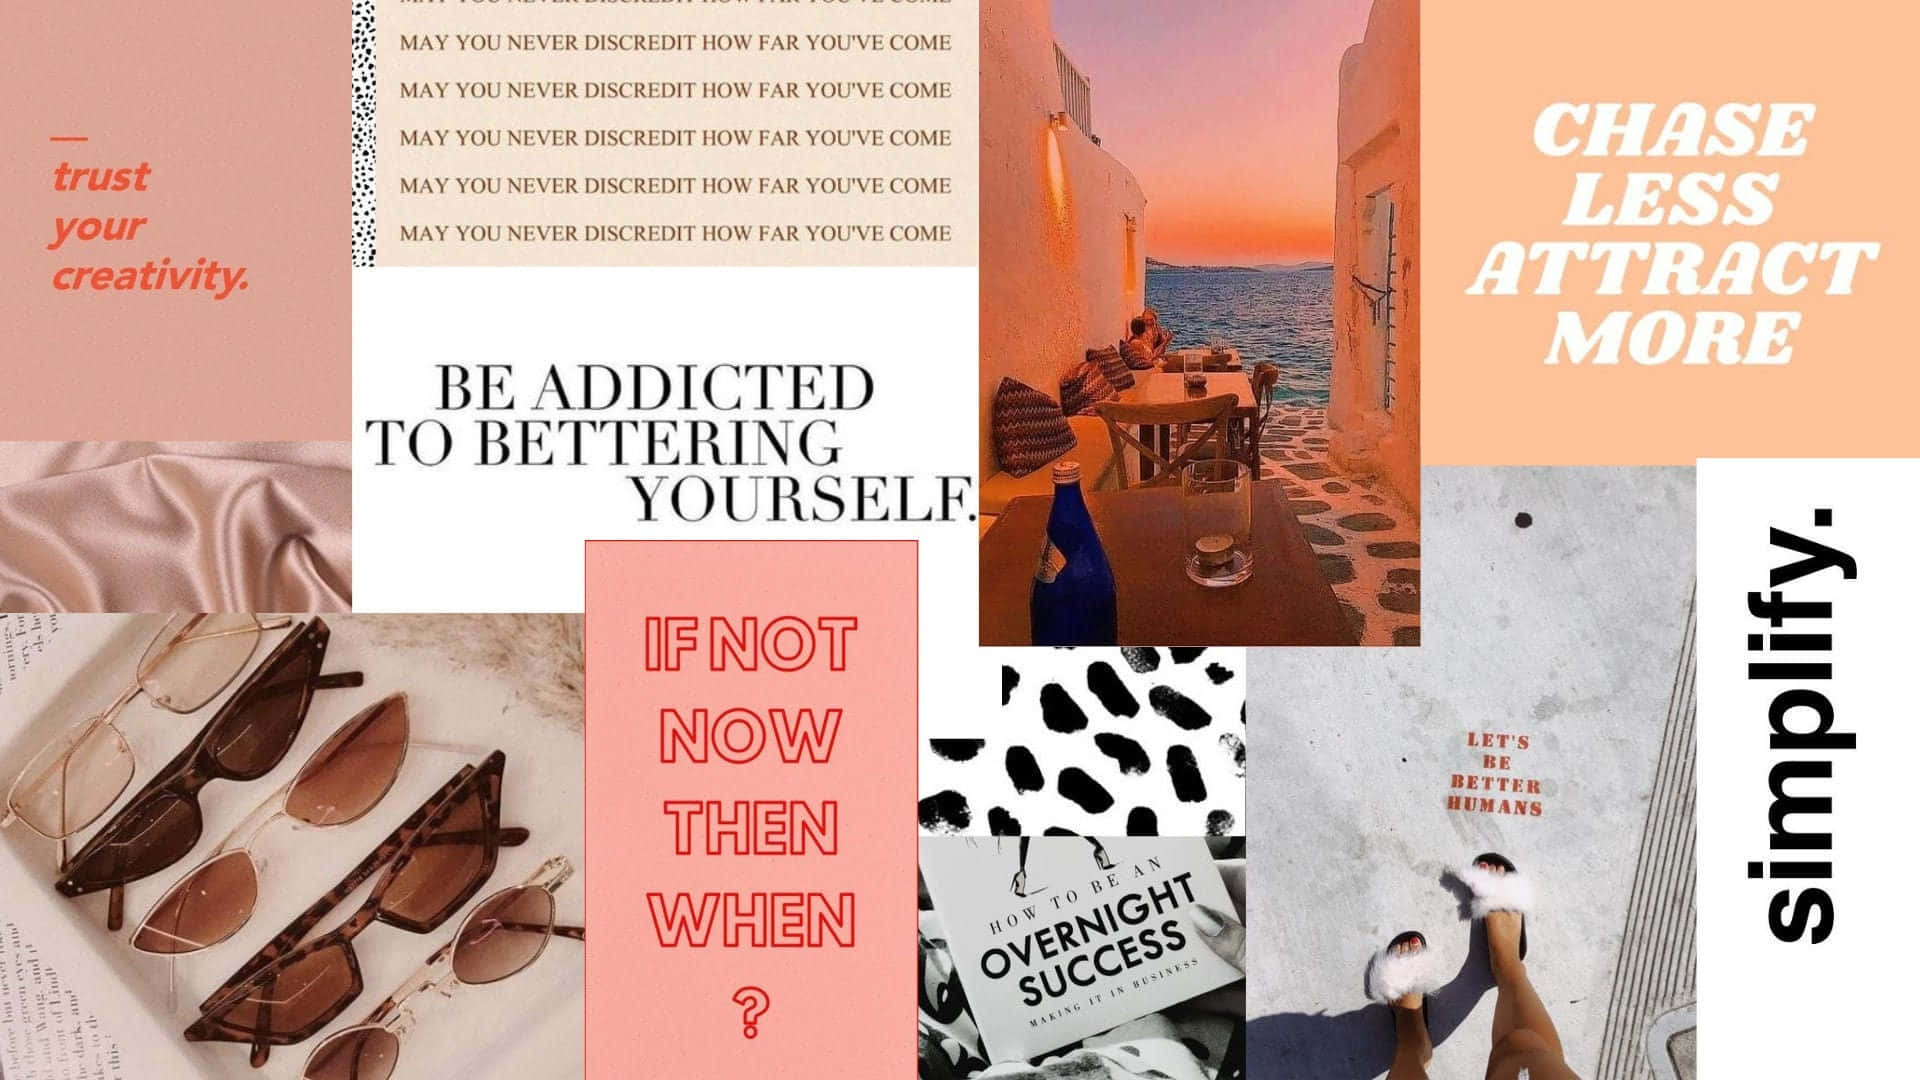 A Collage Of Pictures With The Words'chase Less More' Wallpaper